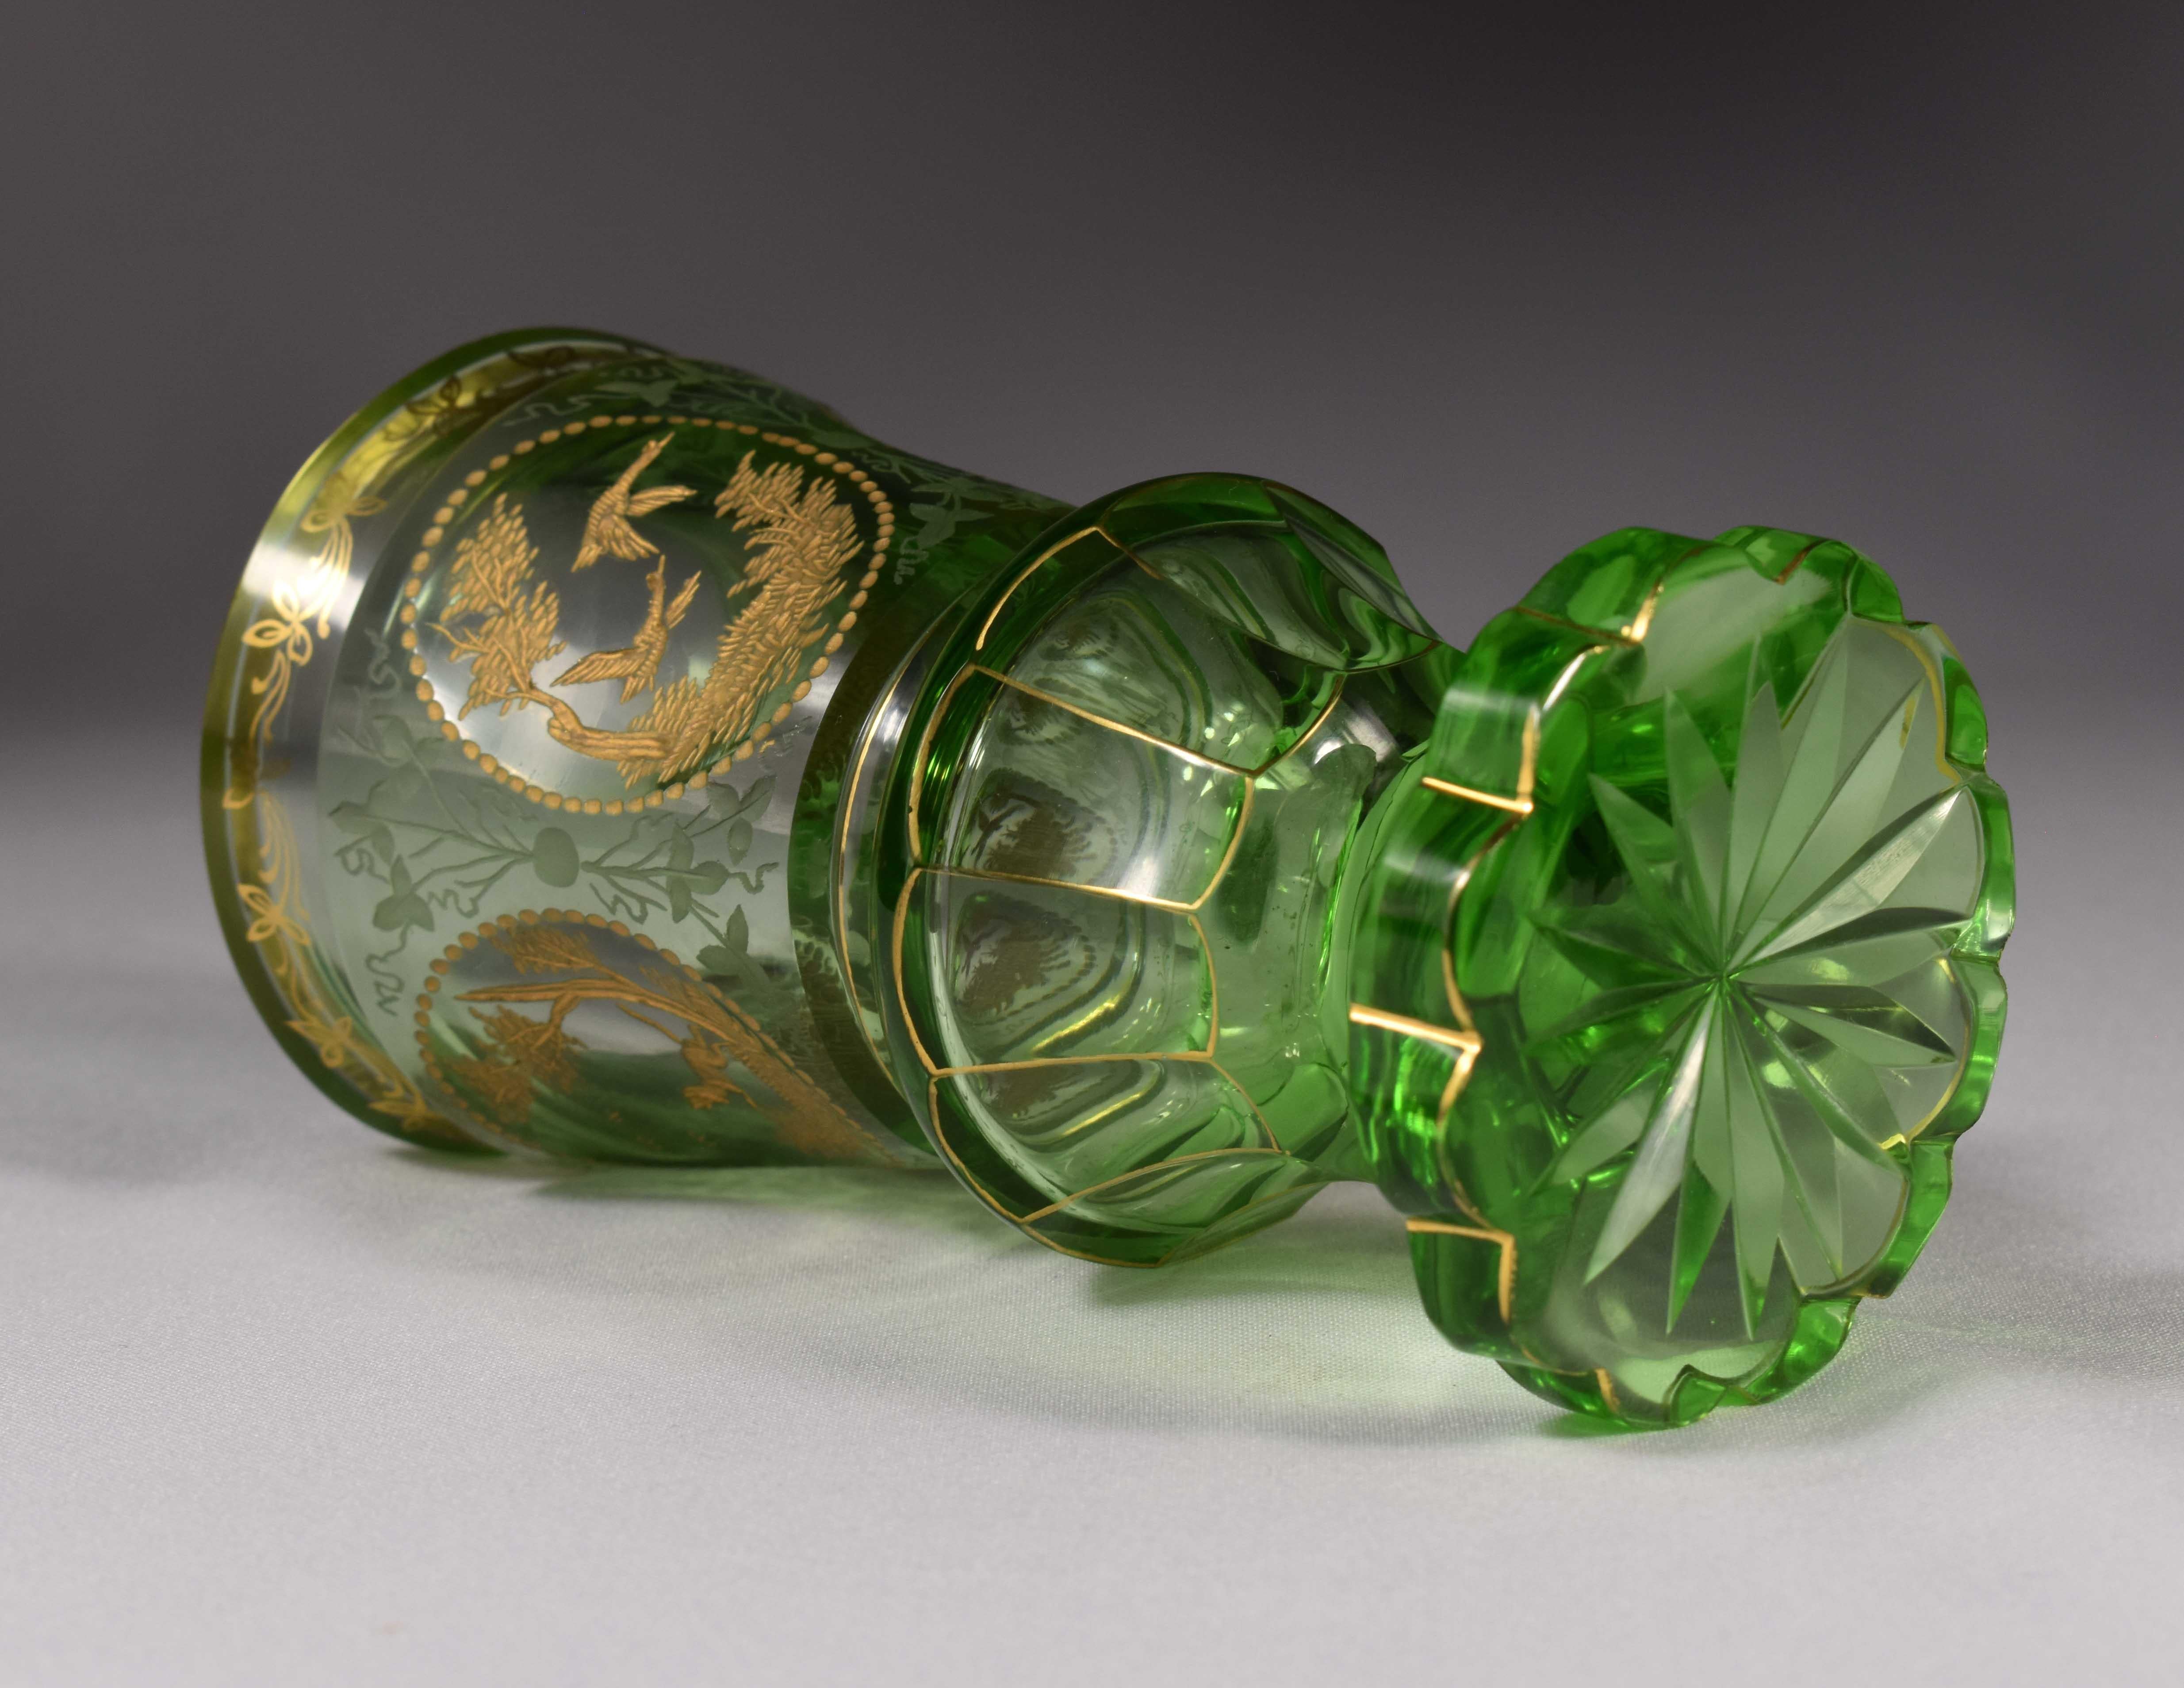 Green Goblet, Bohemian Glass, Engraved and Gilded 1